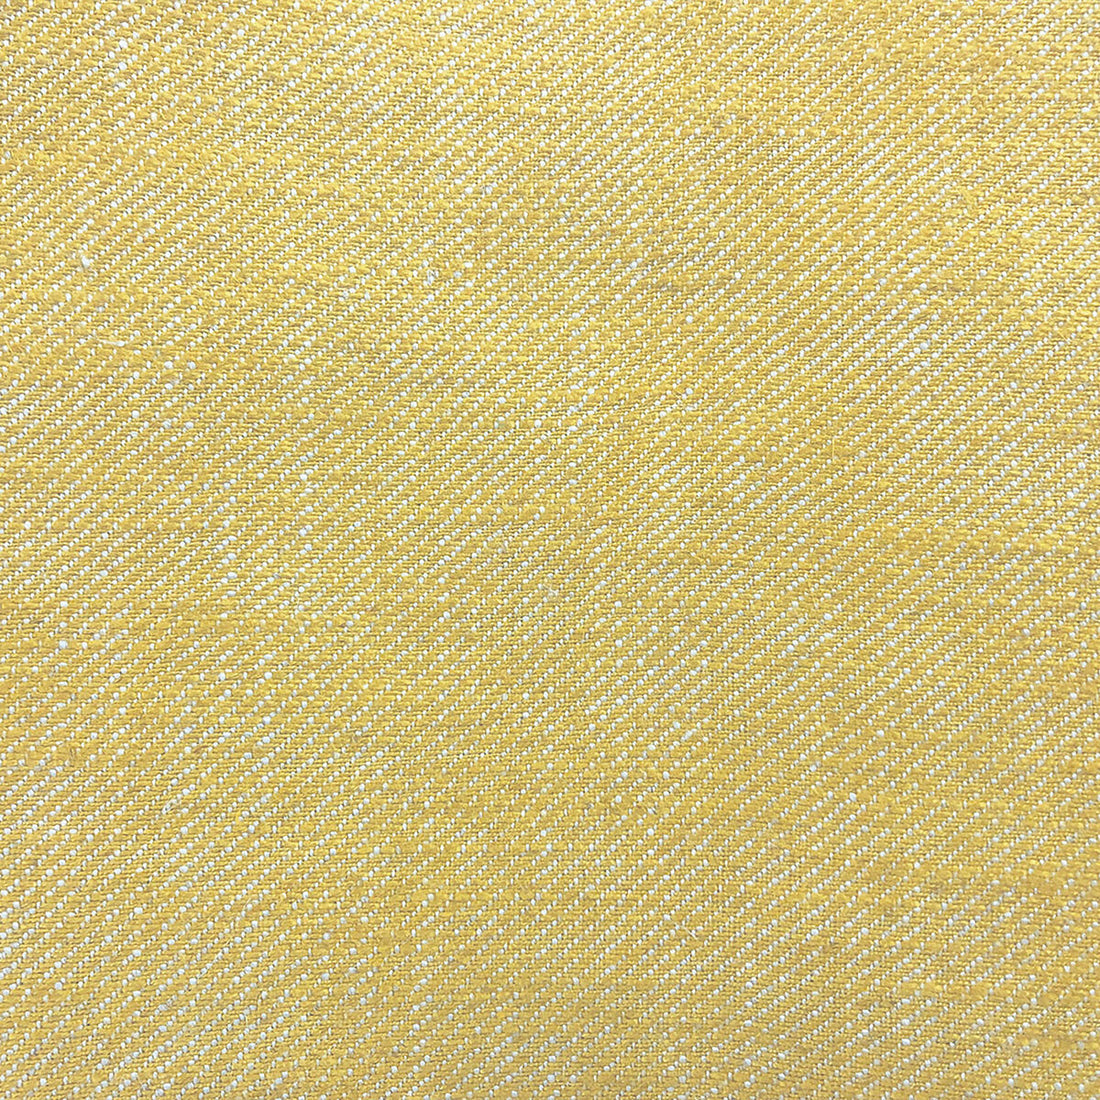 Hisa fabric in amarillo claro color - pattern GDT5639.015.0 - by Gaston y Daniela in the Gaston Japon collection